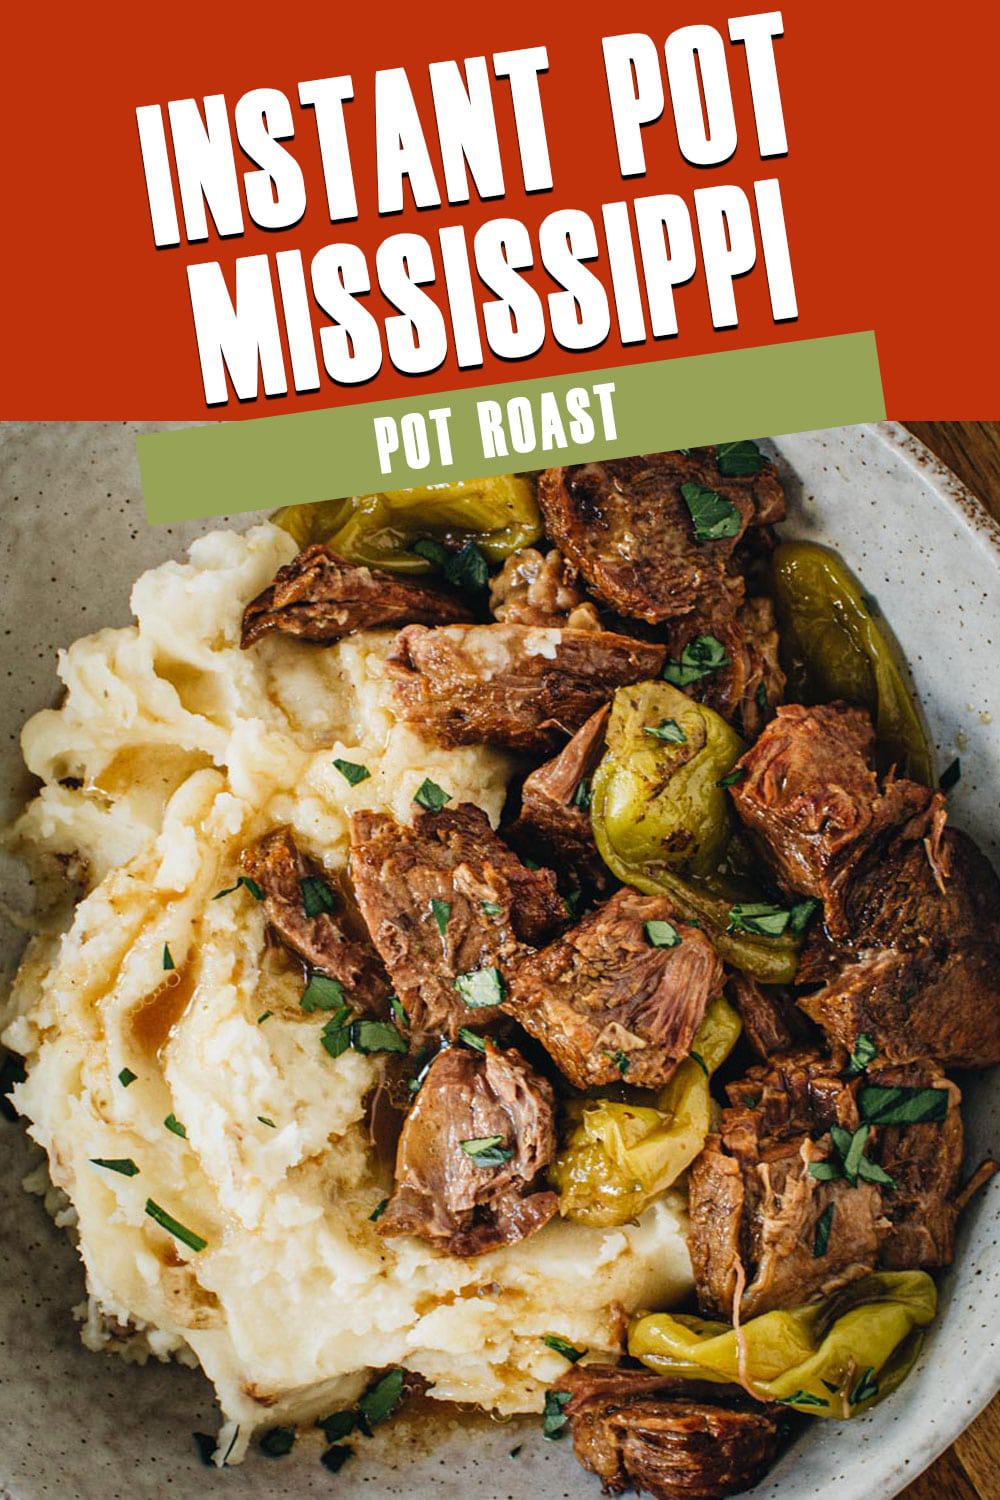 Mississipi pot roast in a bowl over mashed potatoes with title at top.